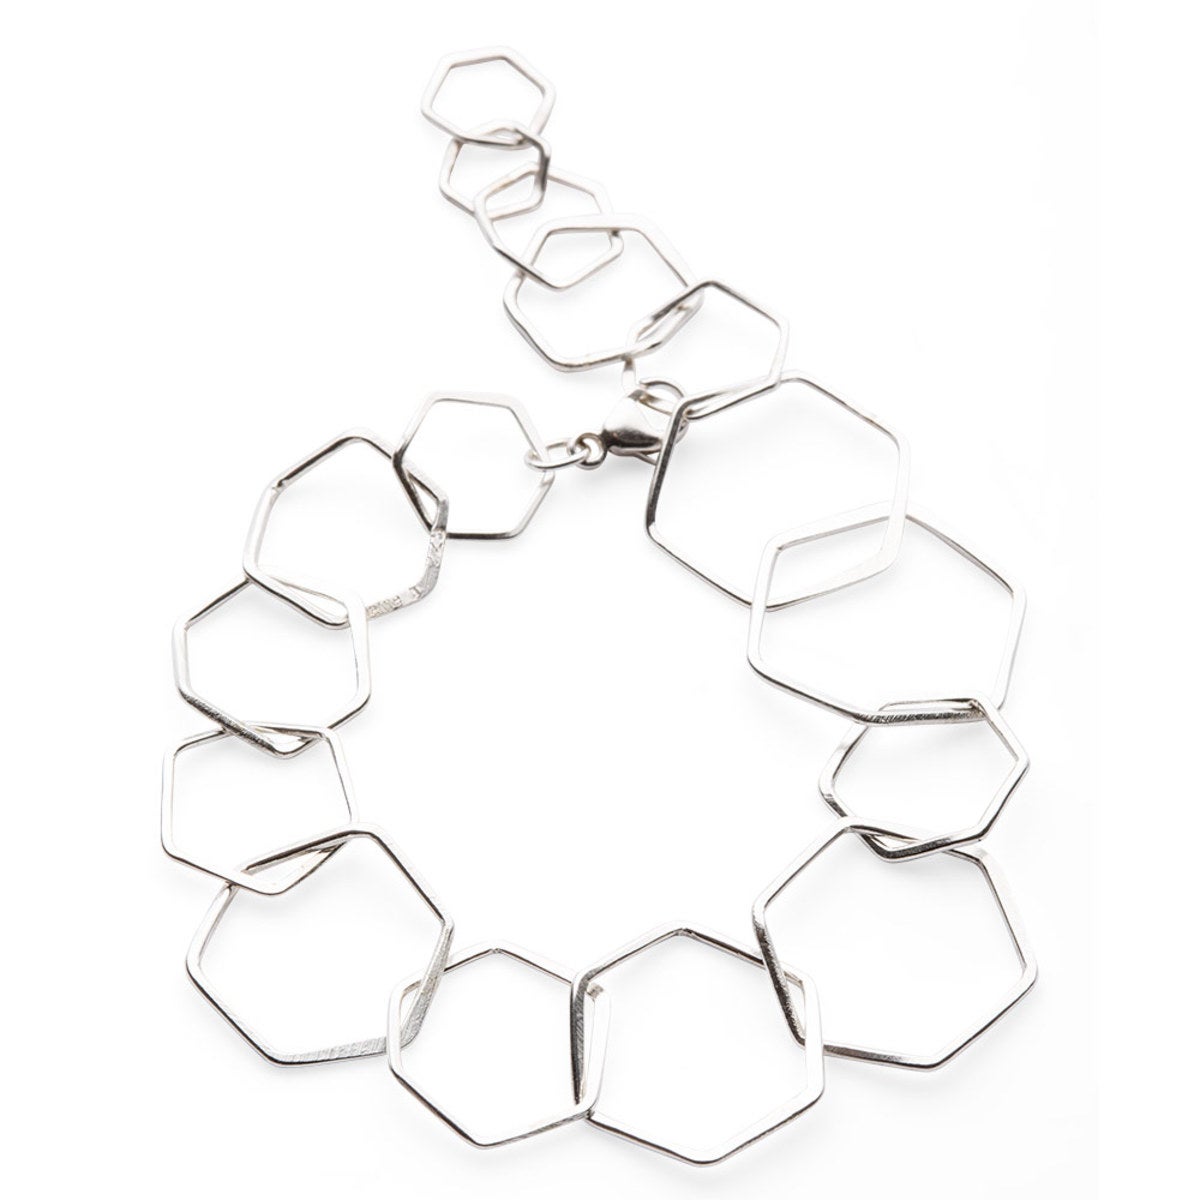 Artisan-Made Silver Hexagon Jewelry Collection